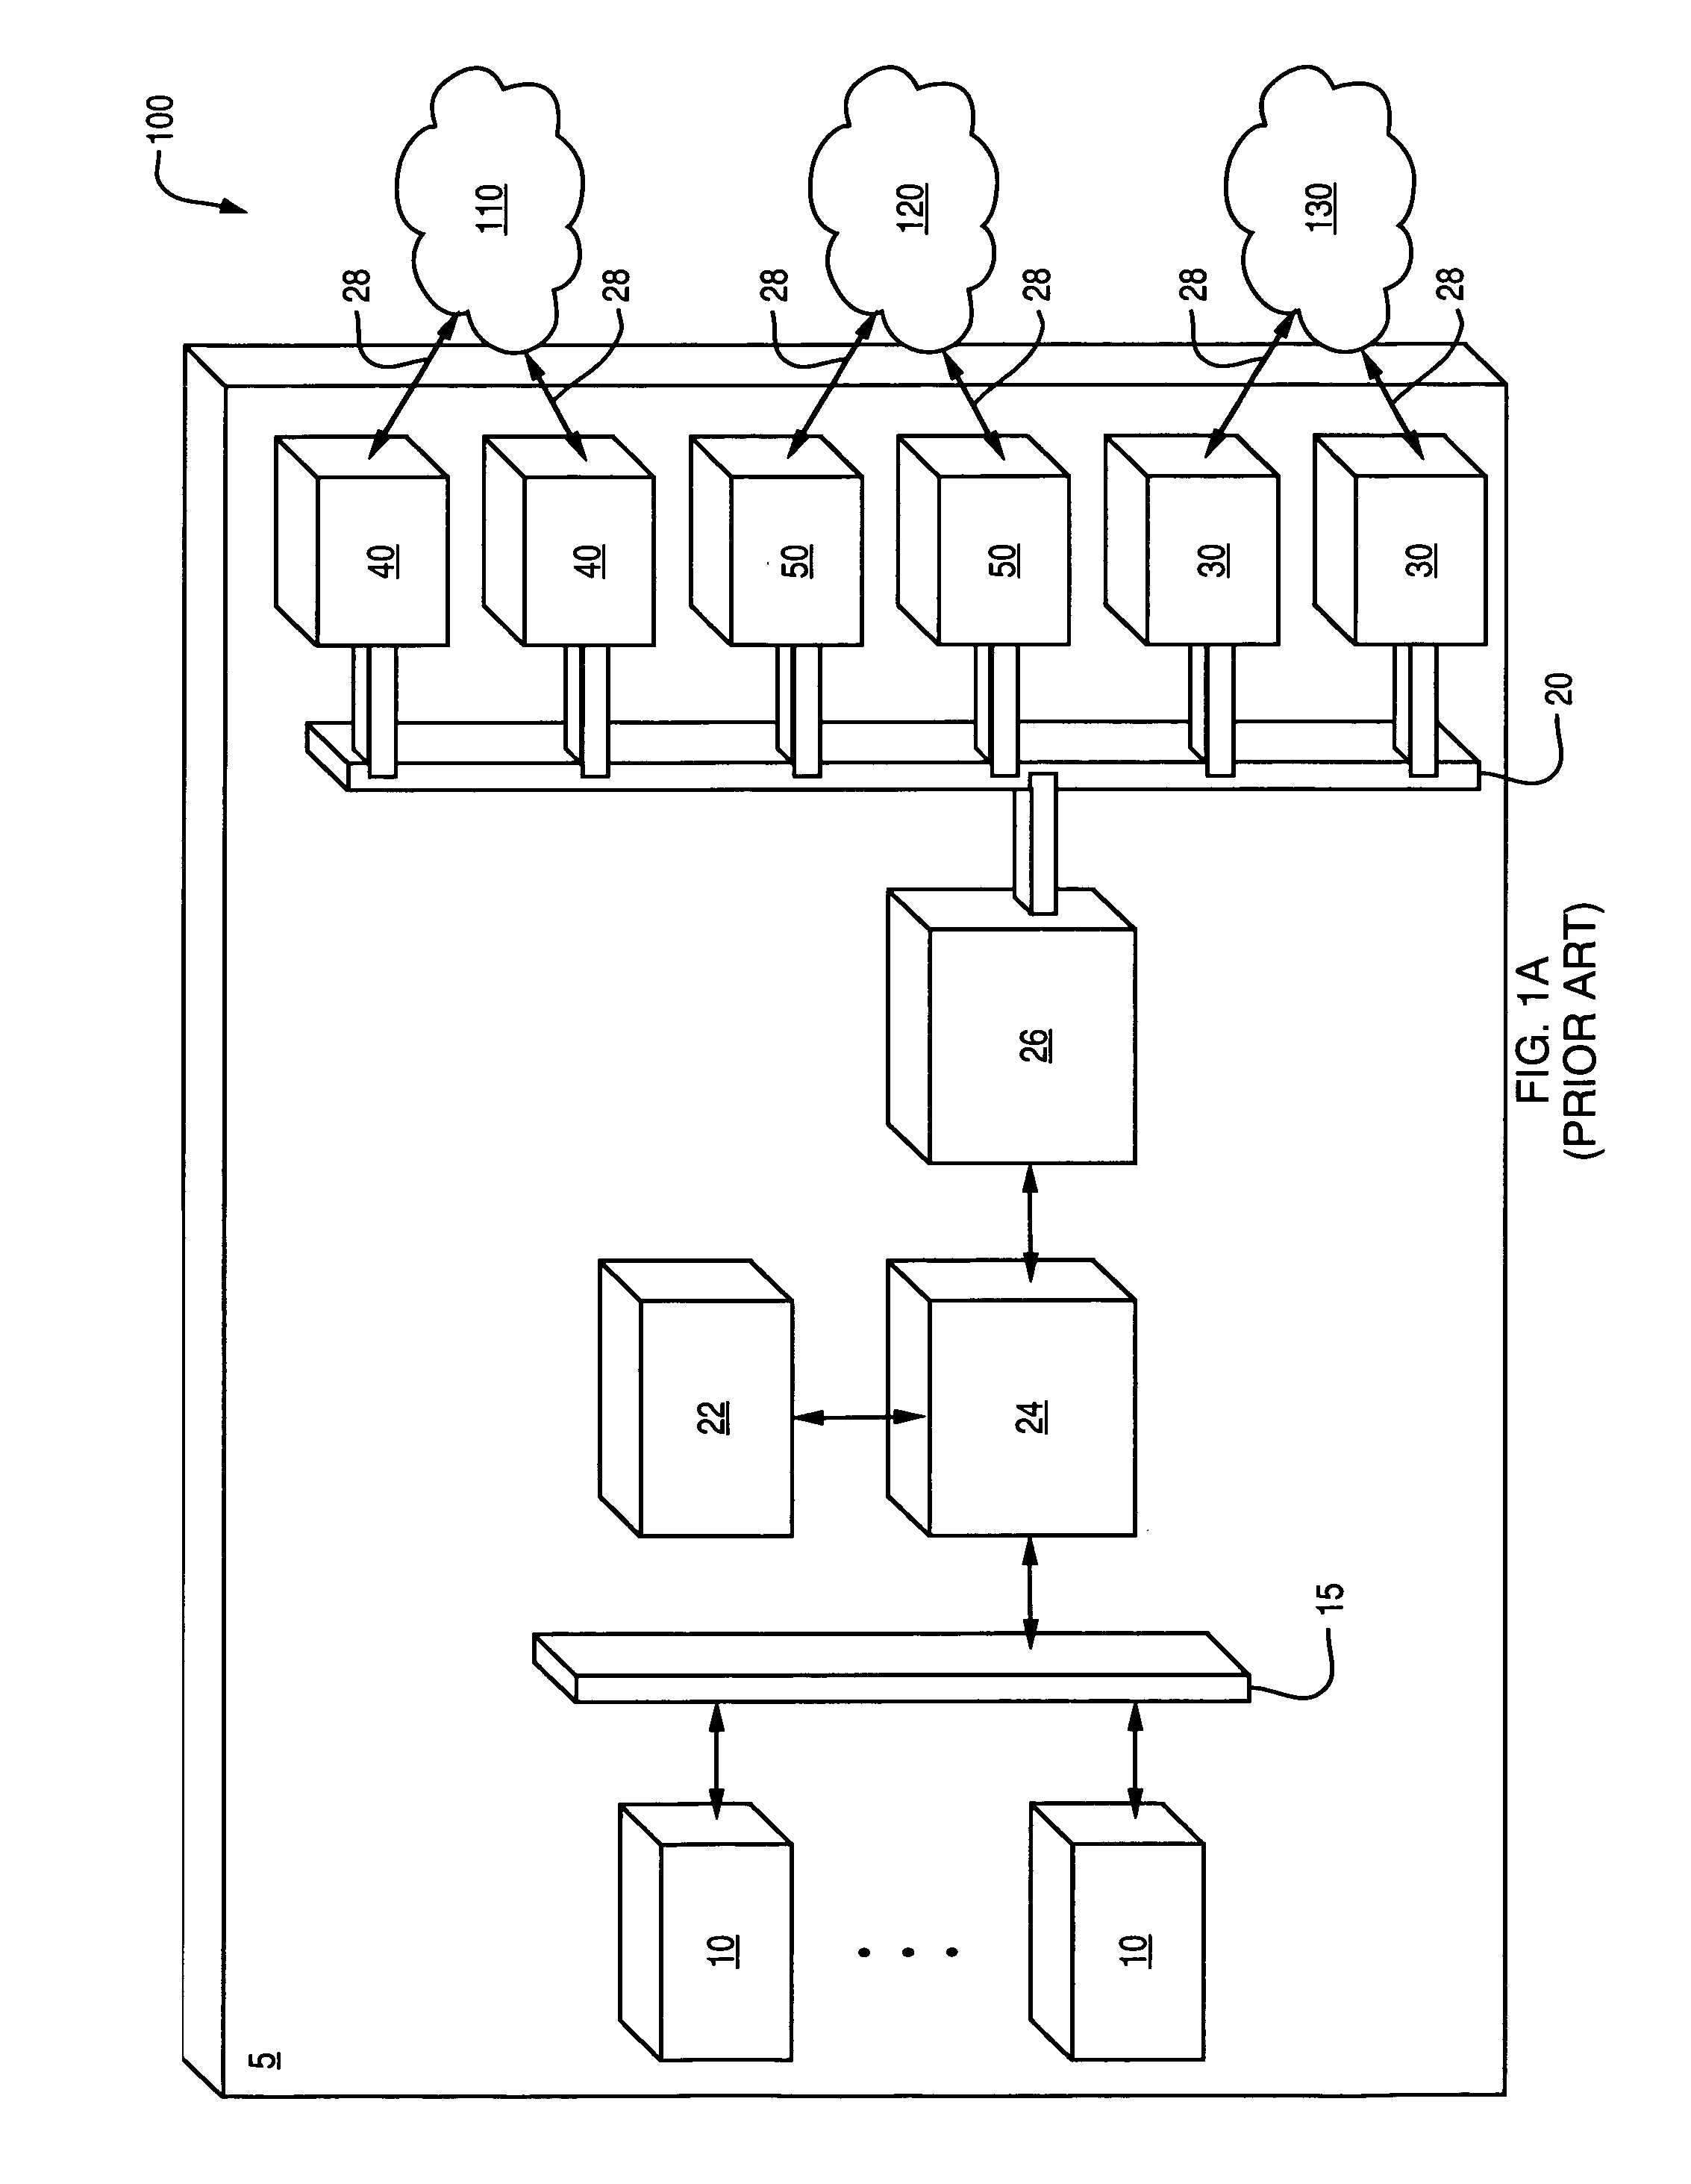 System and method for implementing logical switches in a network system